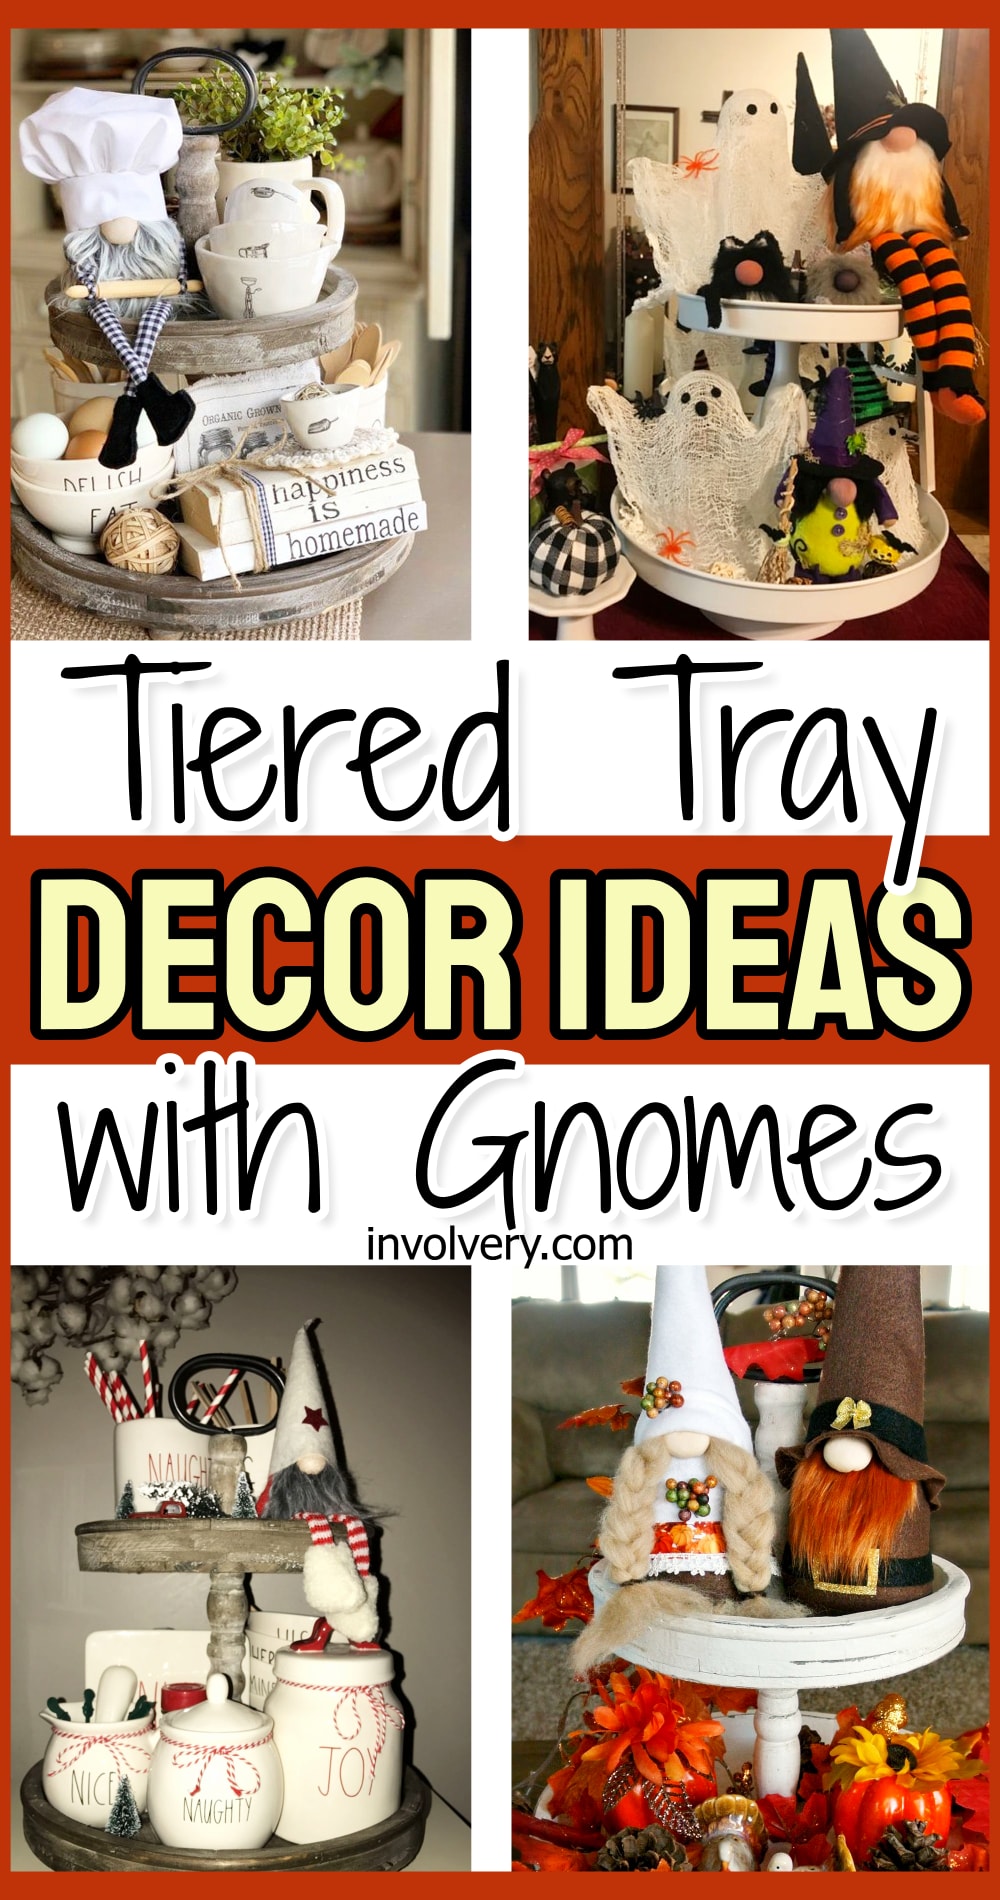 tiered tray decor ideas with gnomes - wooden tray decoration ideas